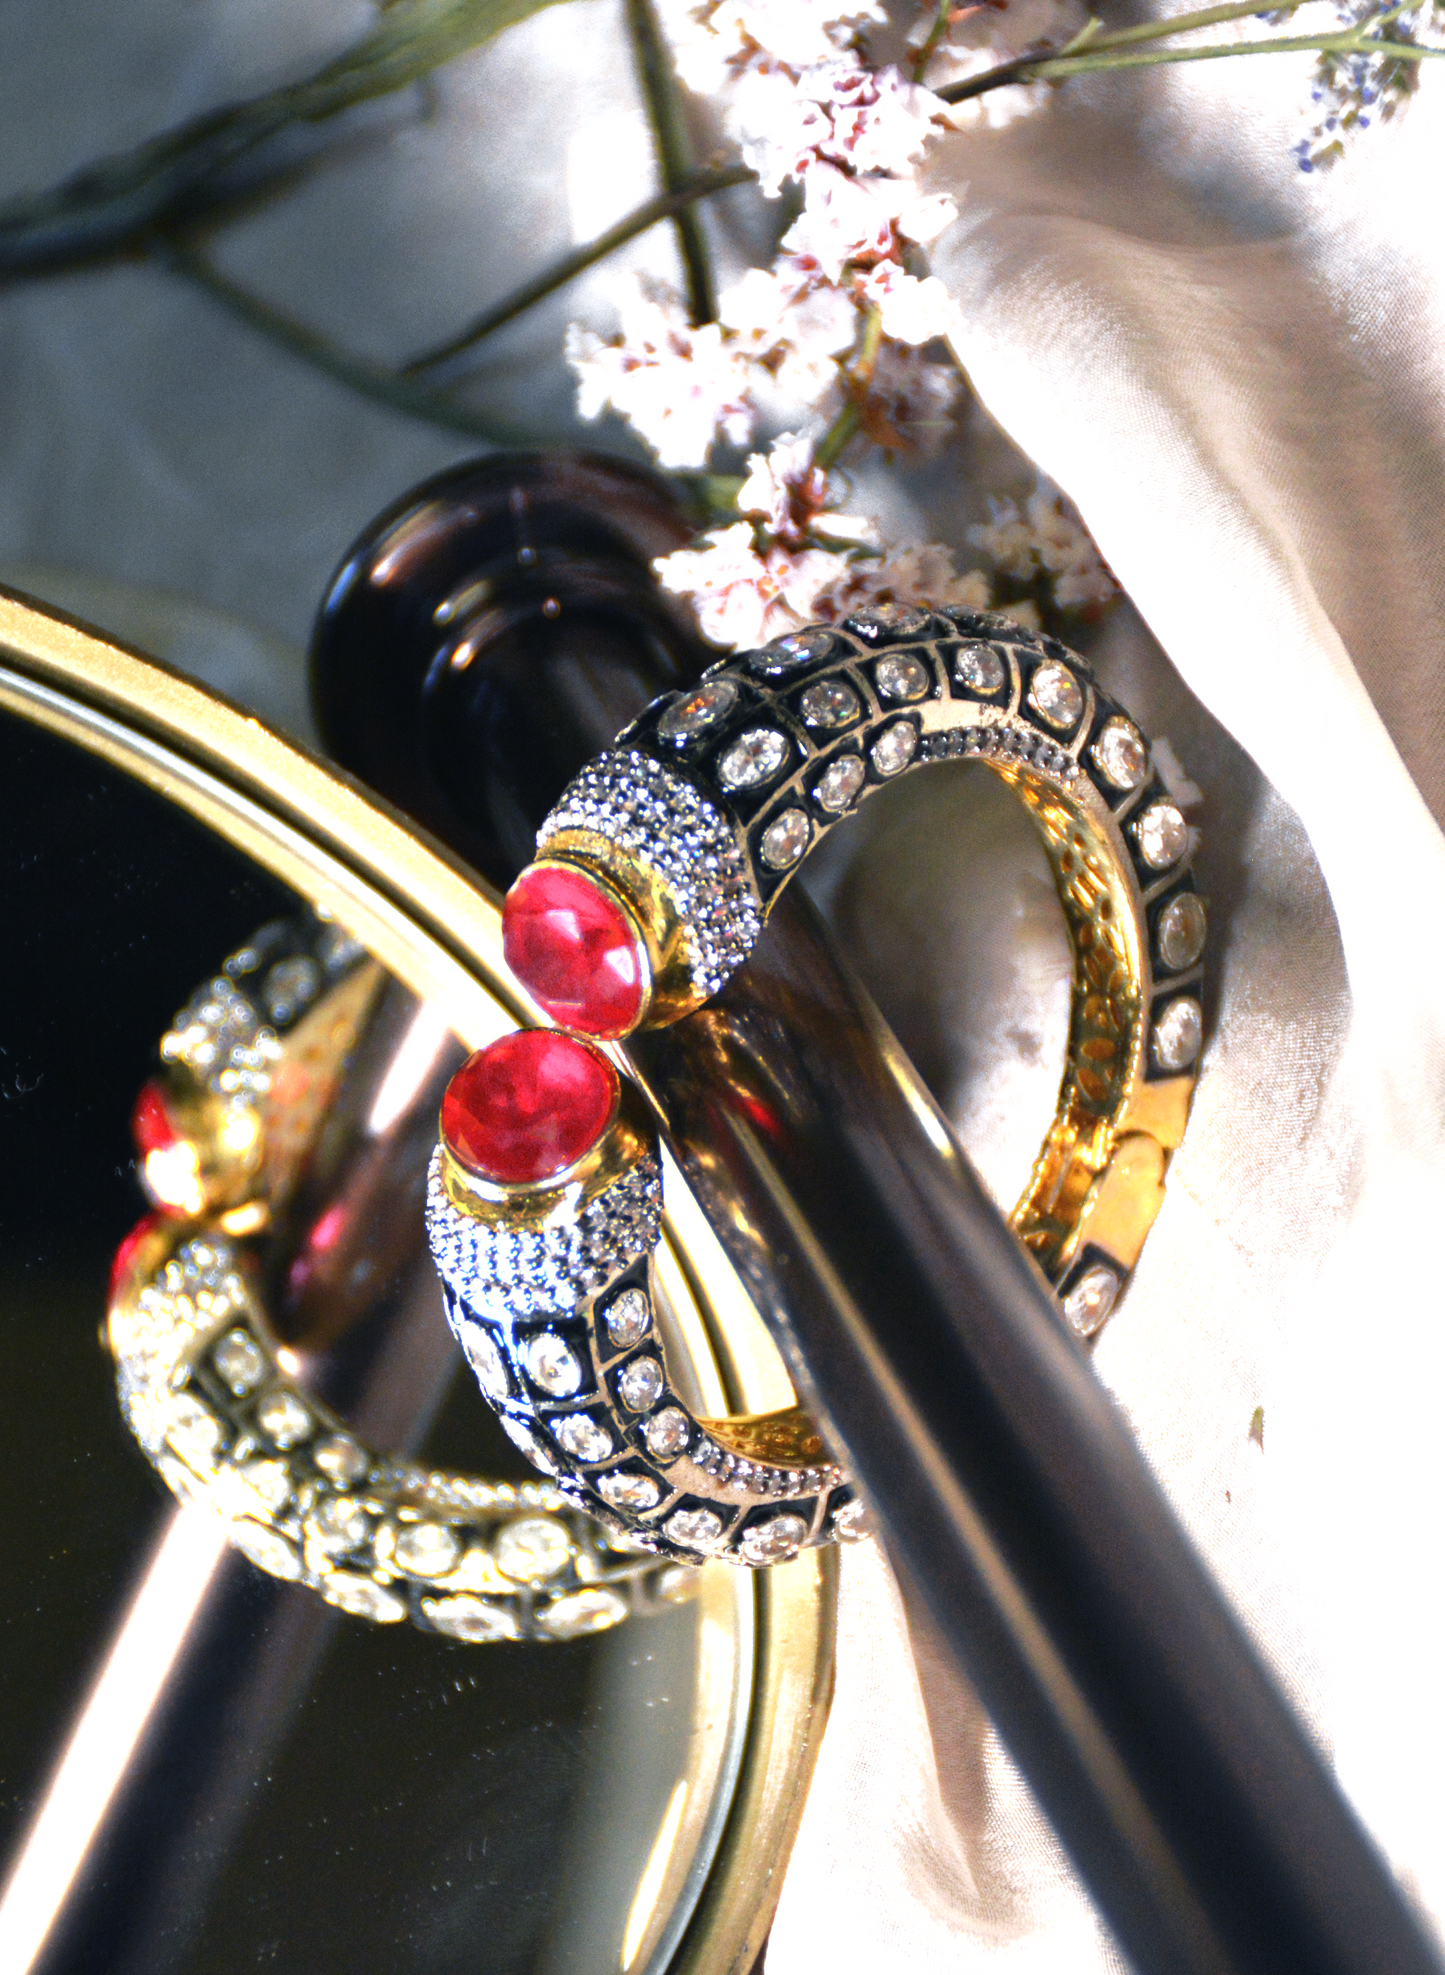 Load image into Gallery viewer, Ruby end Cuff bracelet with CZ stones
